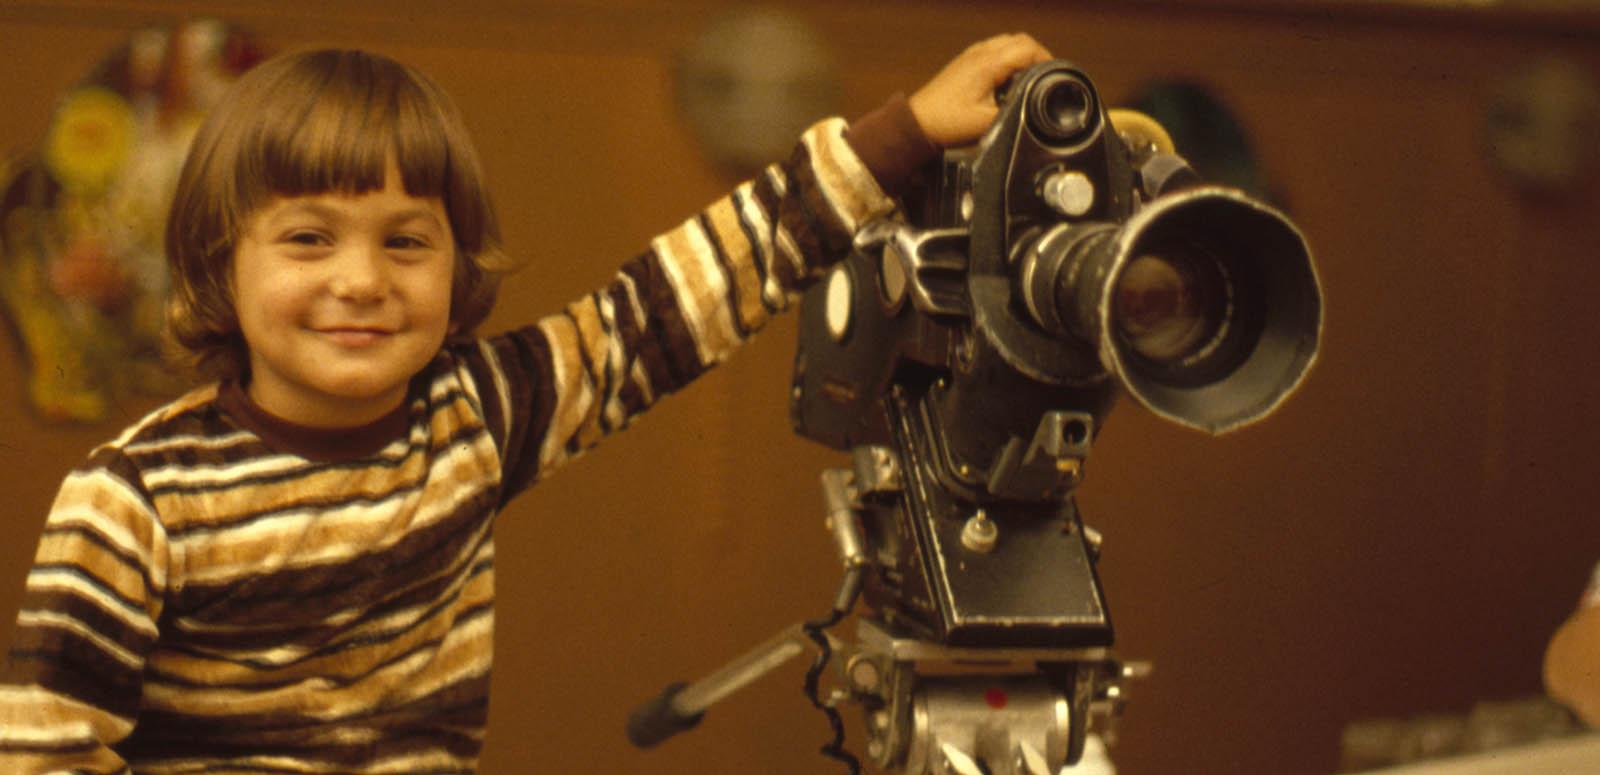 A young boy holds a camera in the 1960s